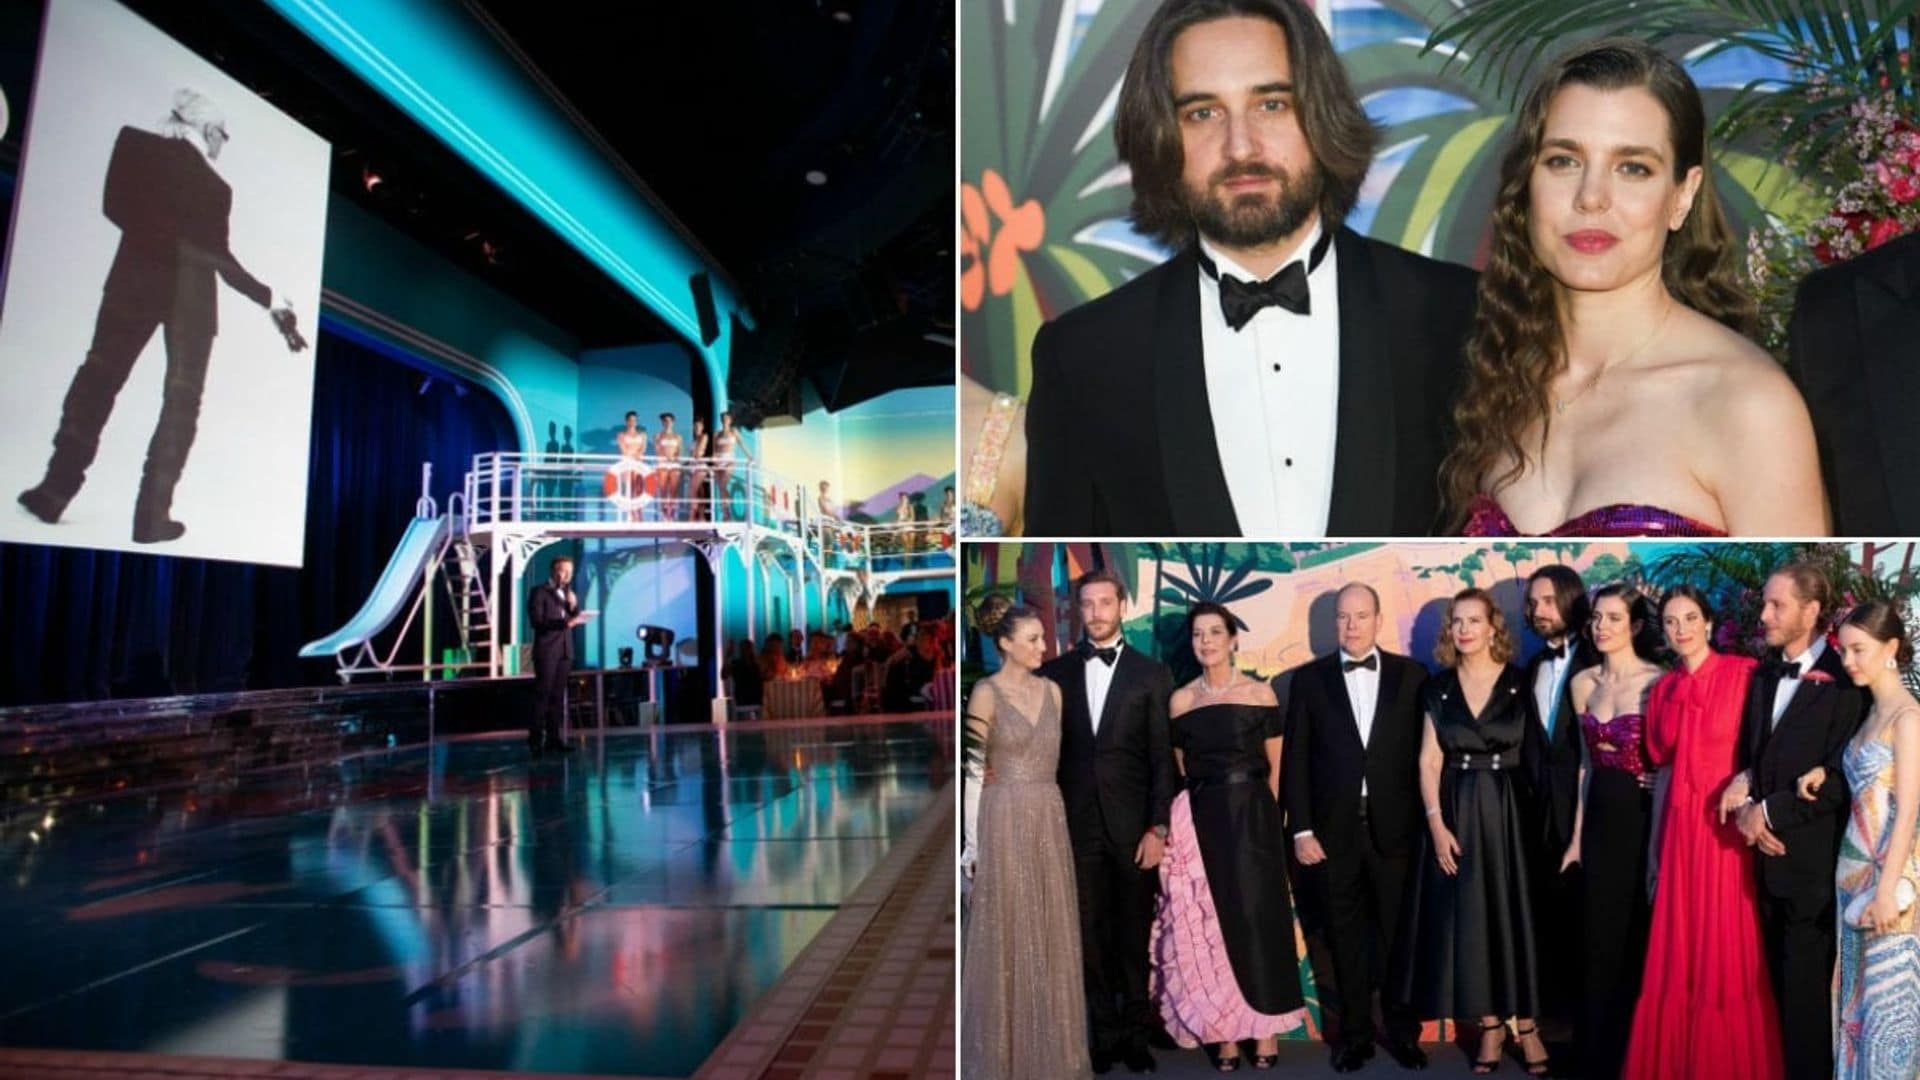 Monaco royals party at final Rose Ball designed by late Karl Lagerfeld - See the epic theme!